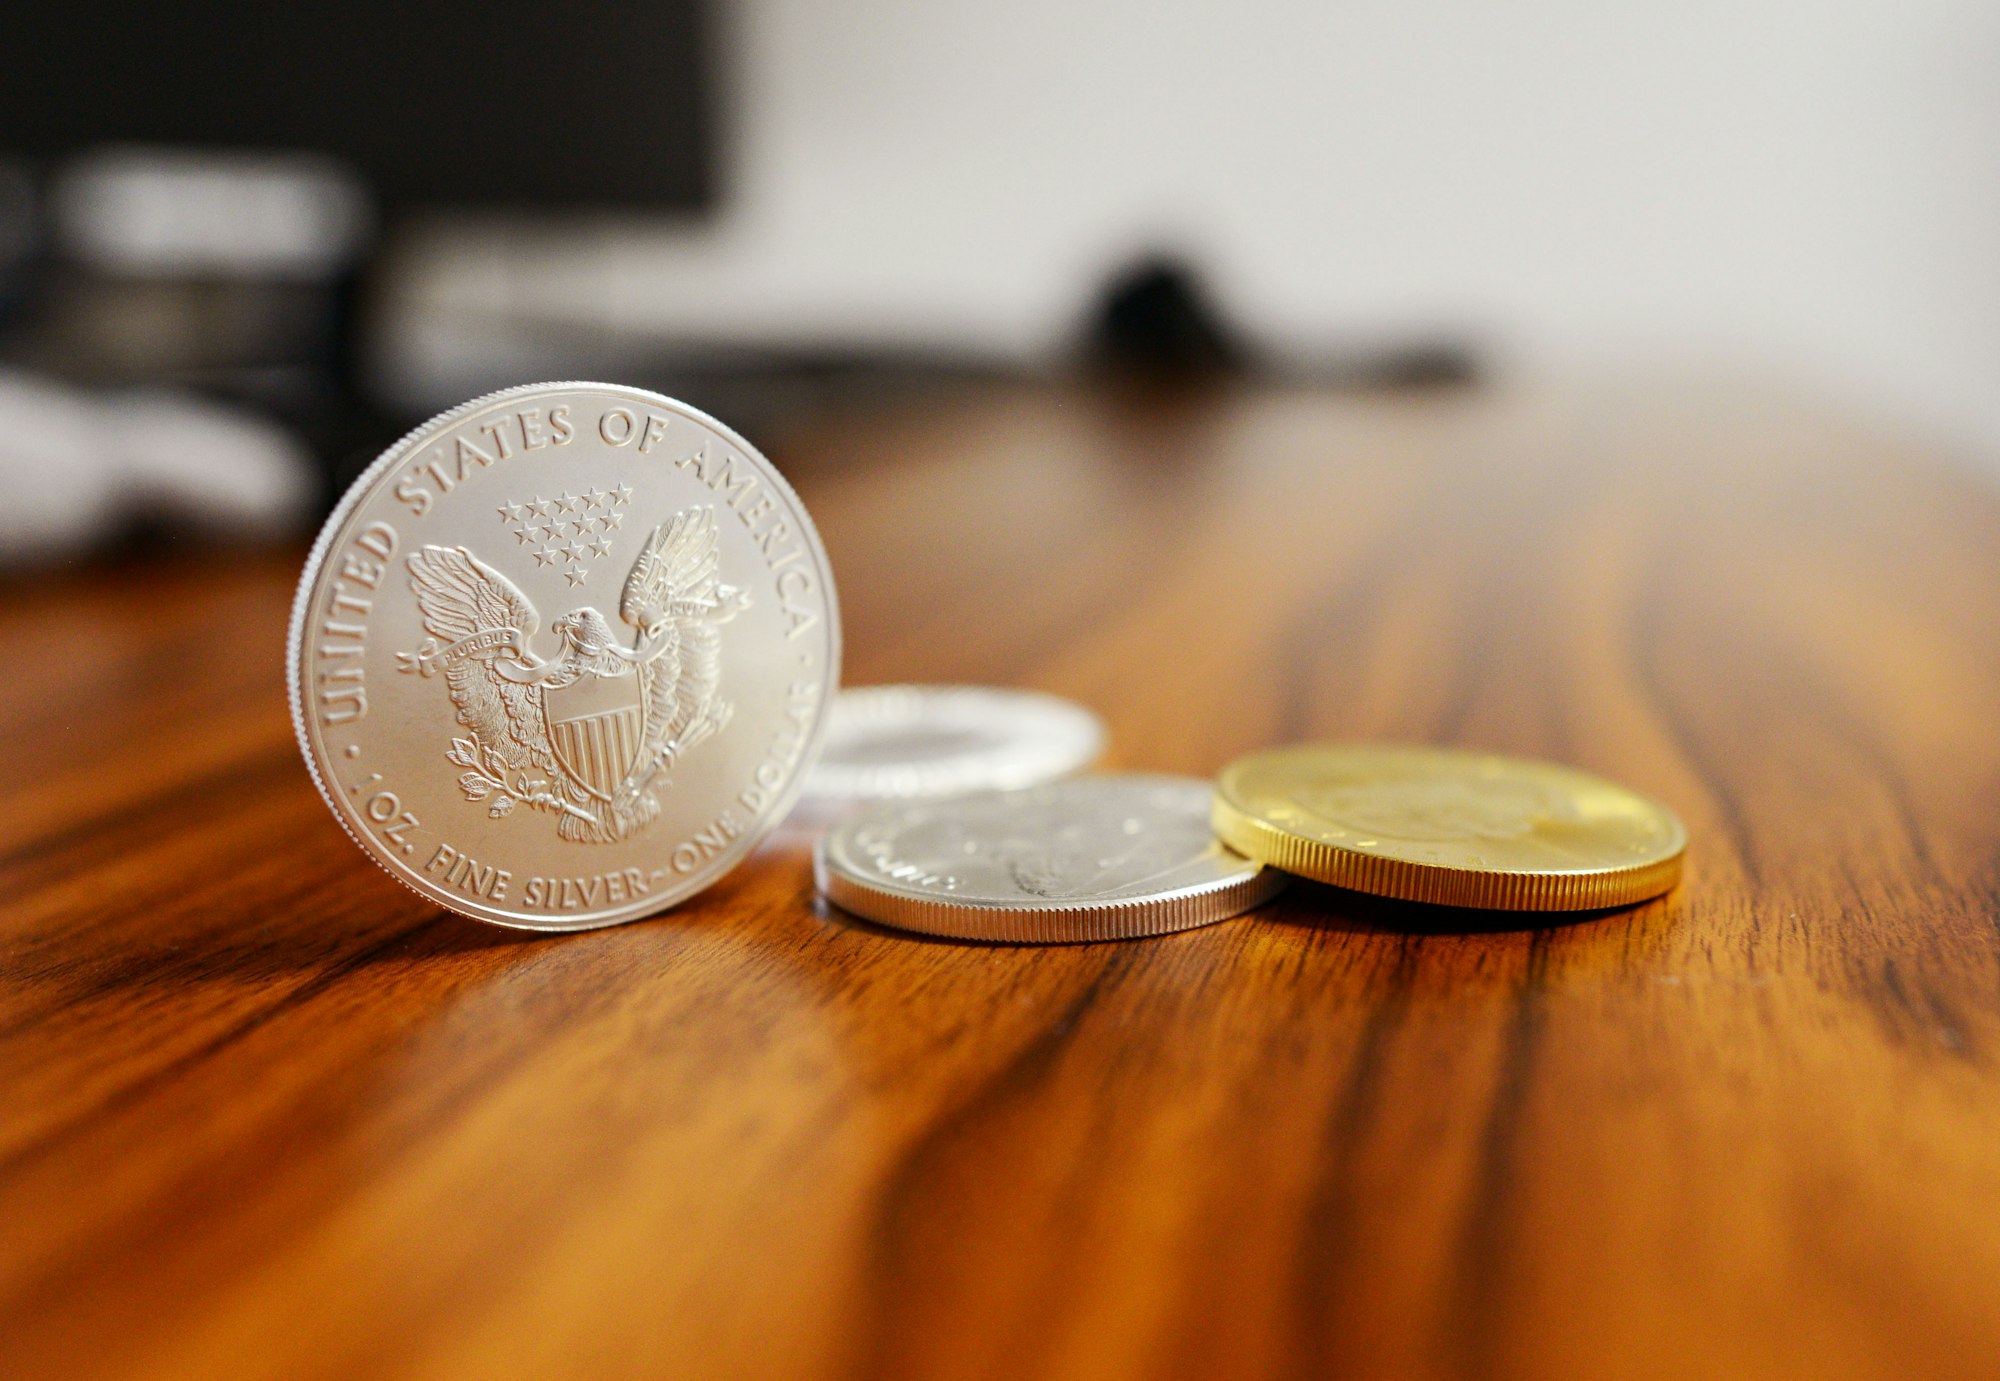 Coins on a table, one standing on edge.